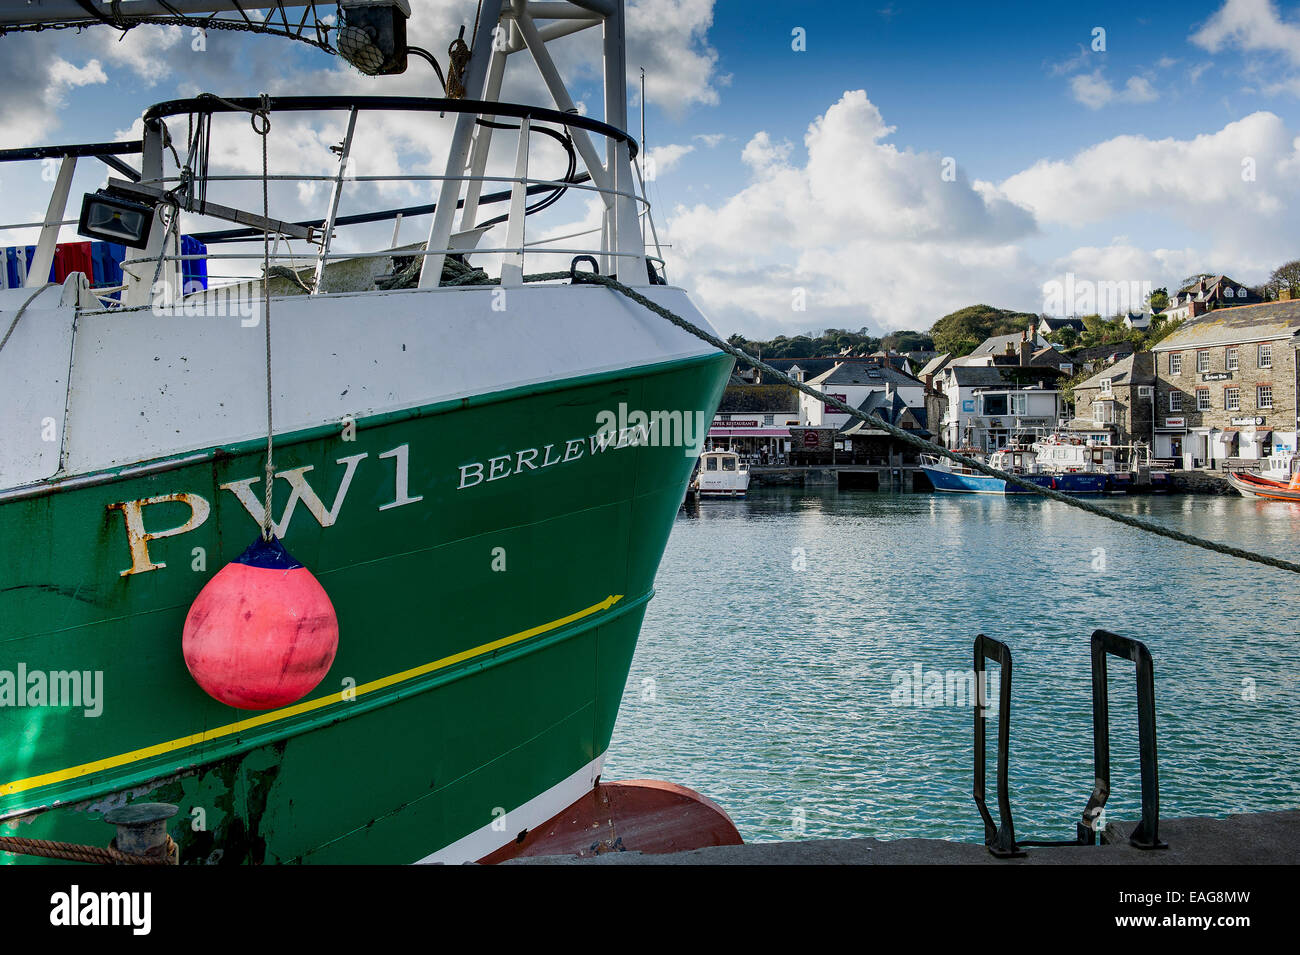 The gill netters 'Berlewen' and 'Charisma' moored in Padstow